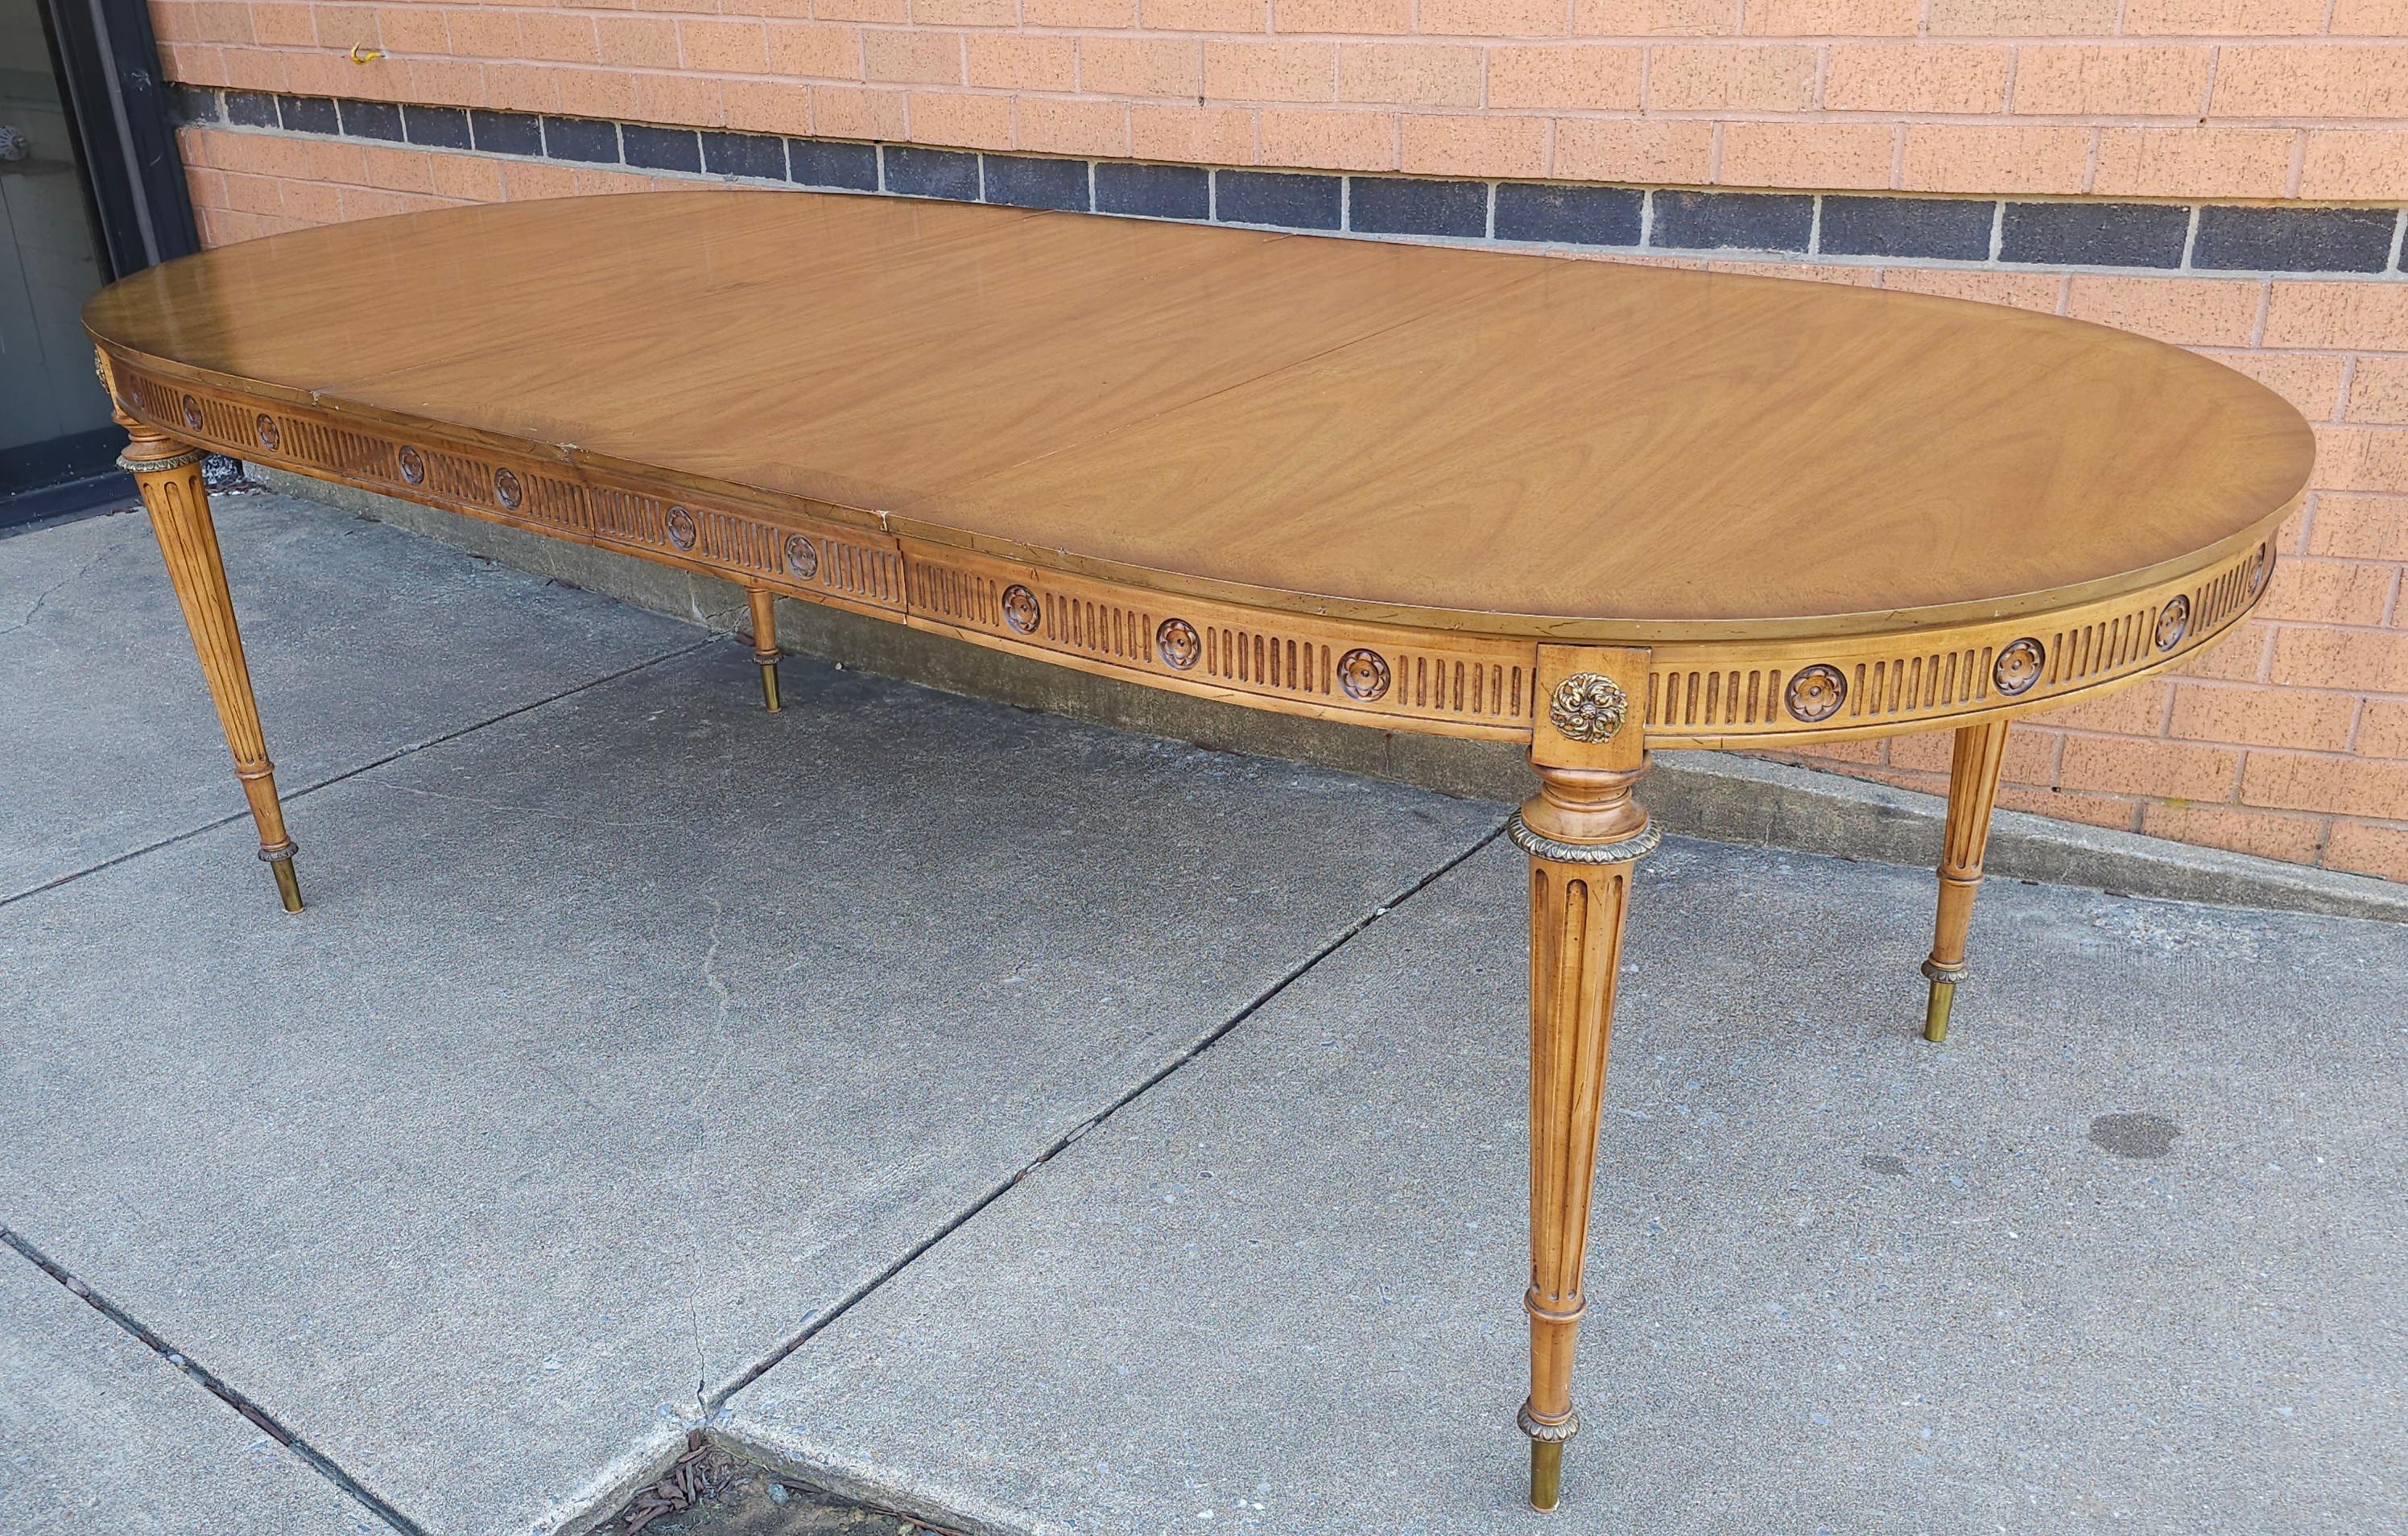 Louis XVI Style Brass Mounted French Walnut Oval Extension Dining Table With two Leaves.
Measures 98